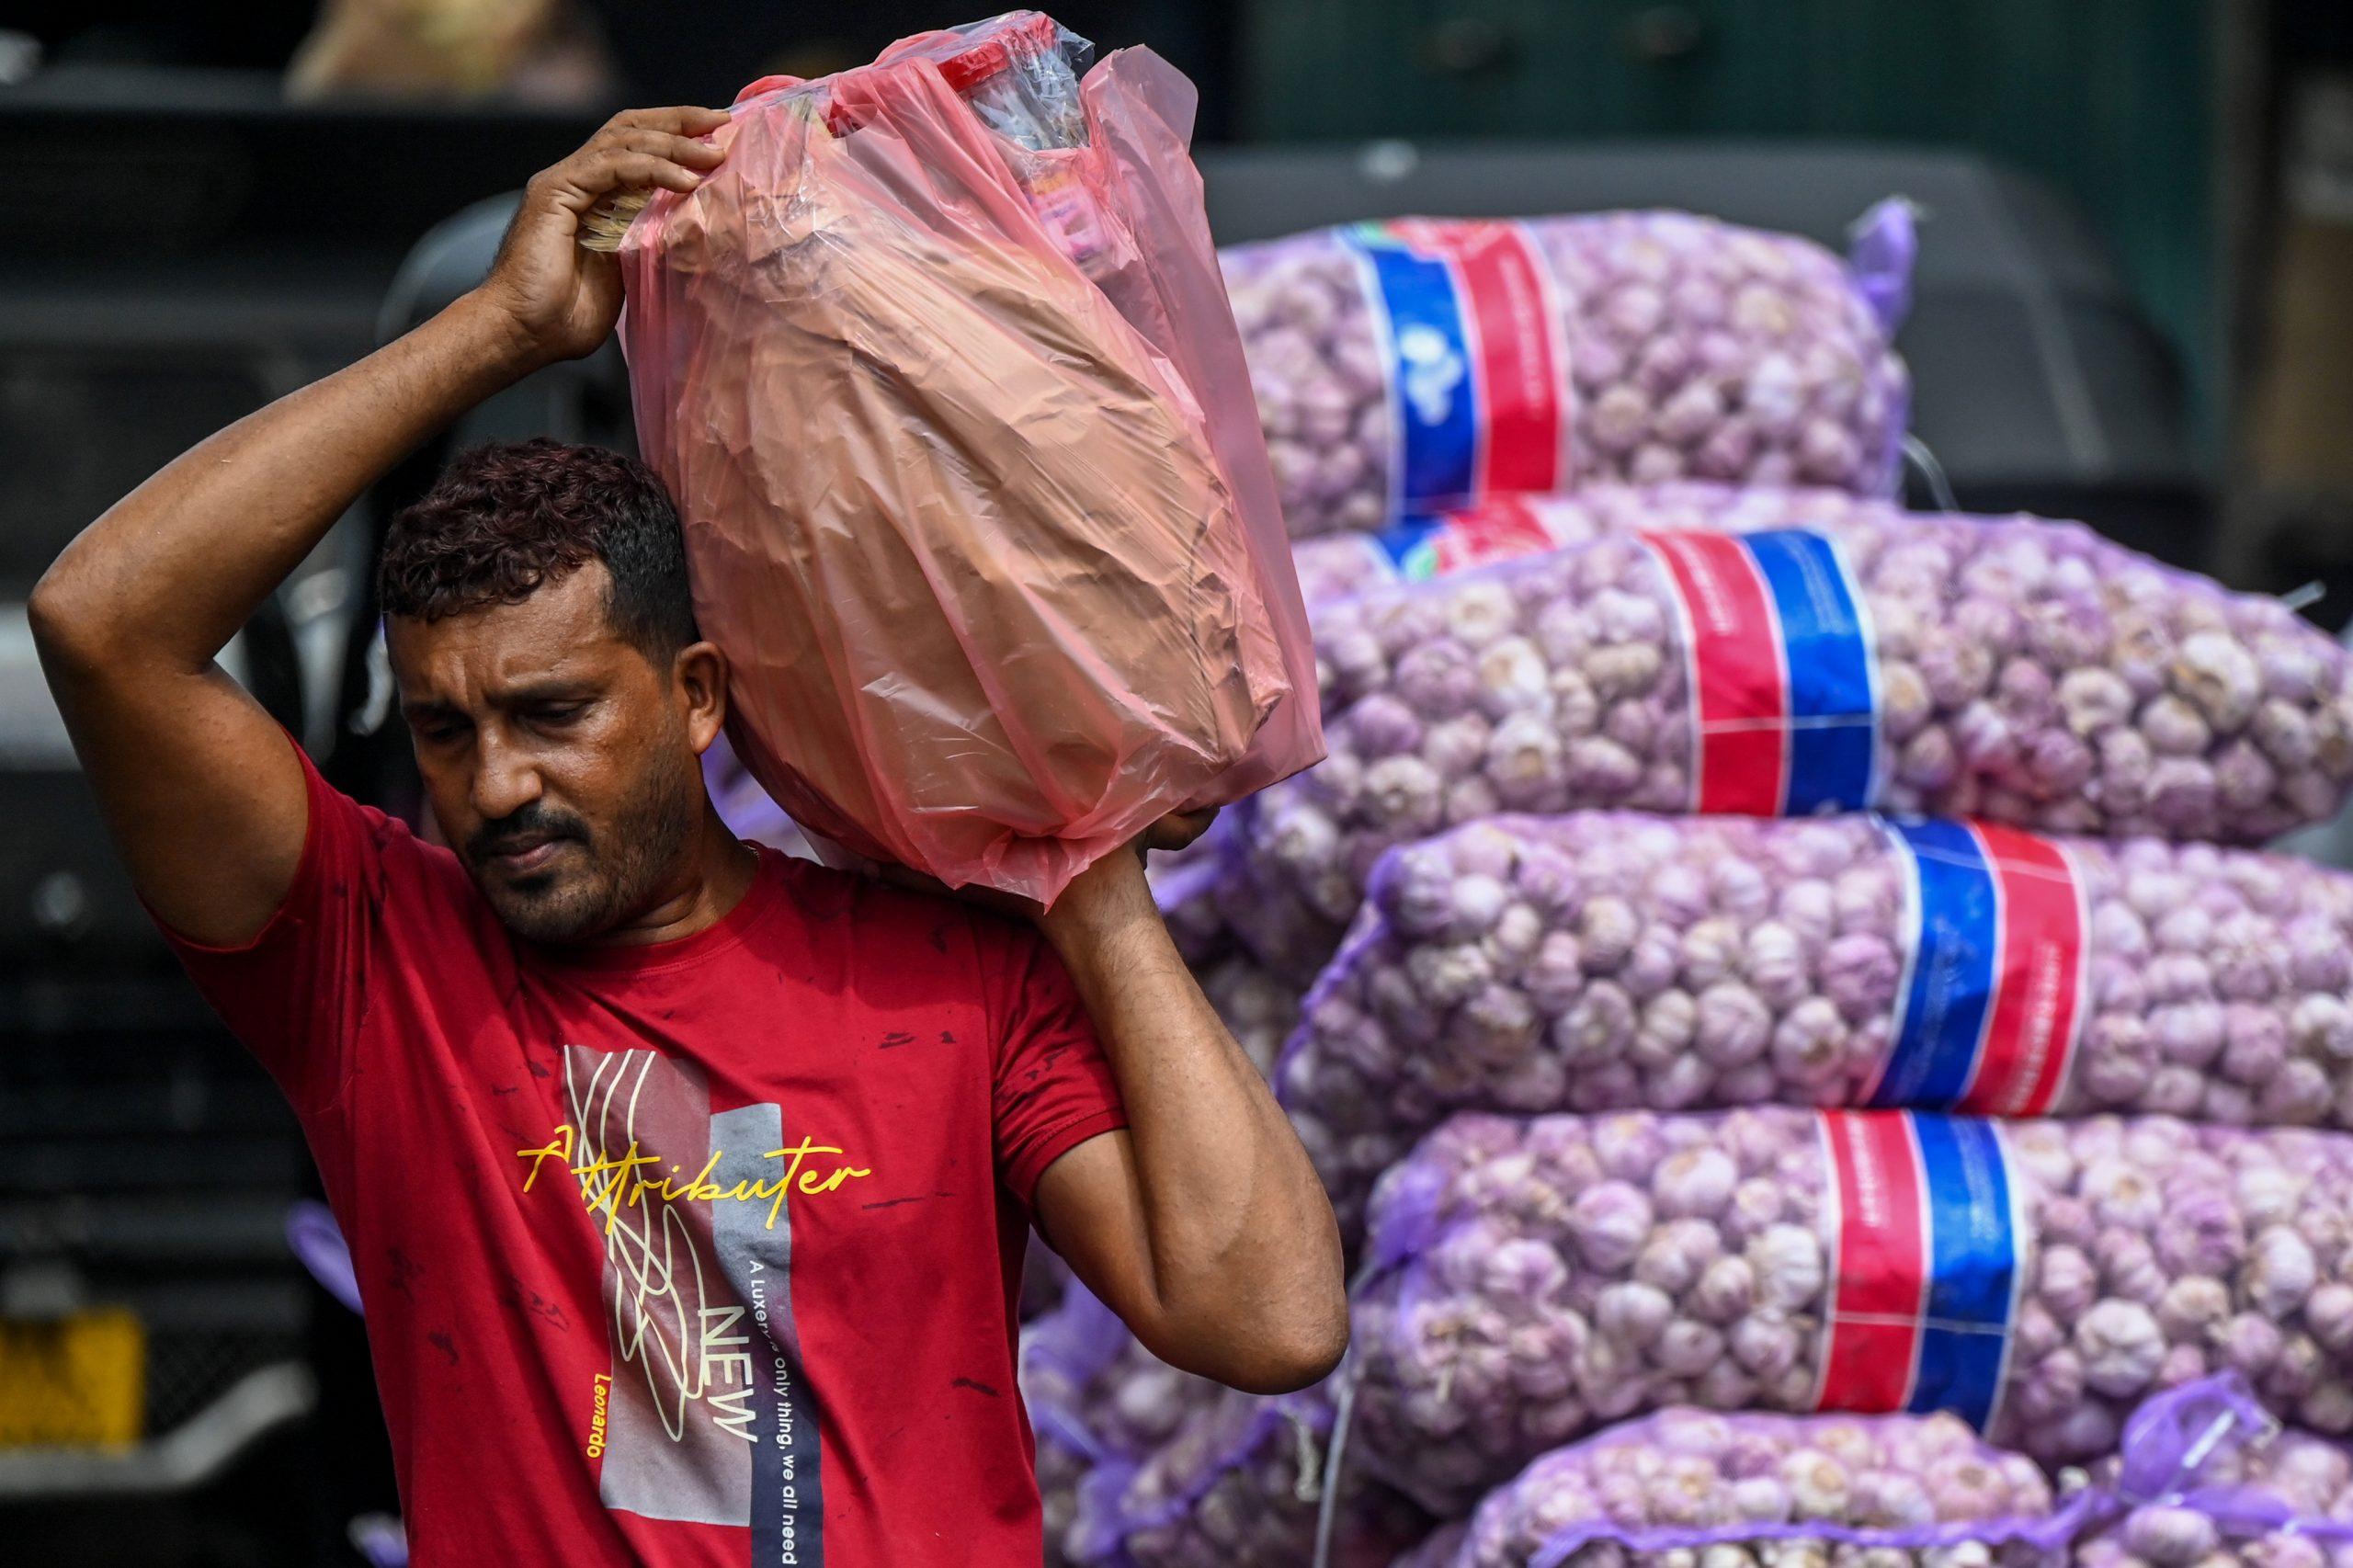 Workers transport food grains and other essential goods at a market after authorities relaxed the ongoing curfew for a few hours in Colombo on May 12. Photo: AFP